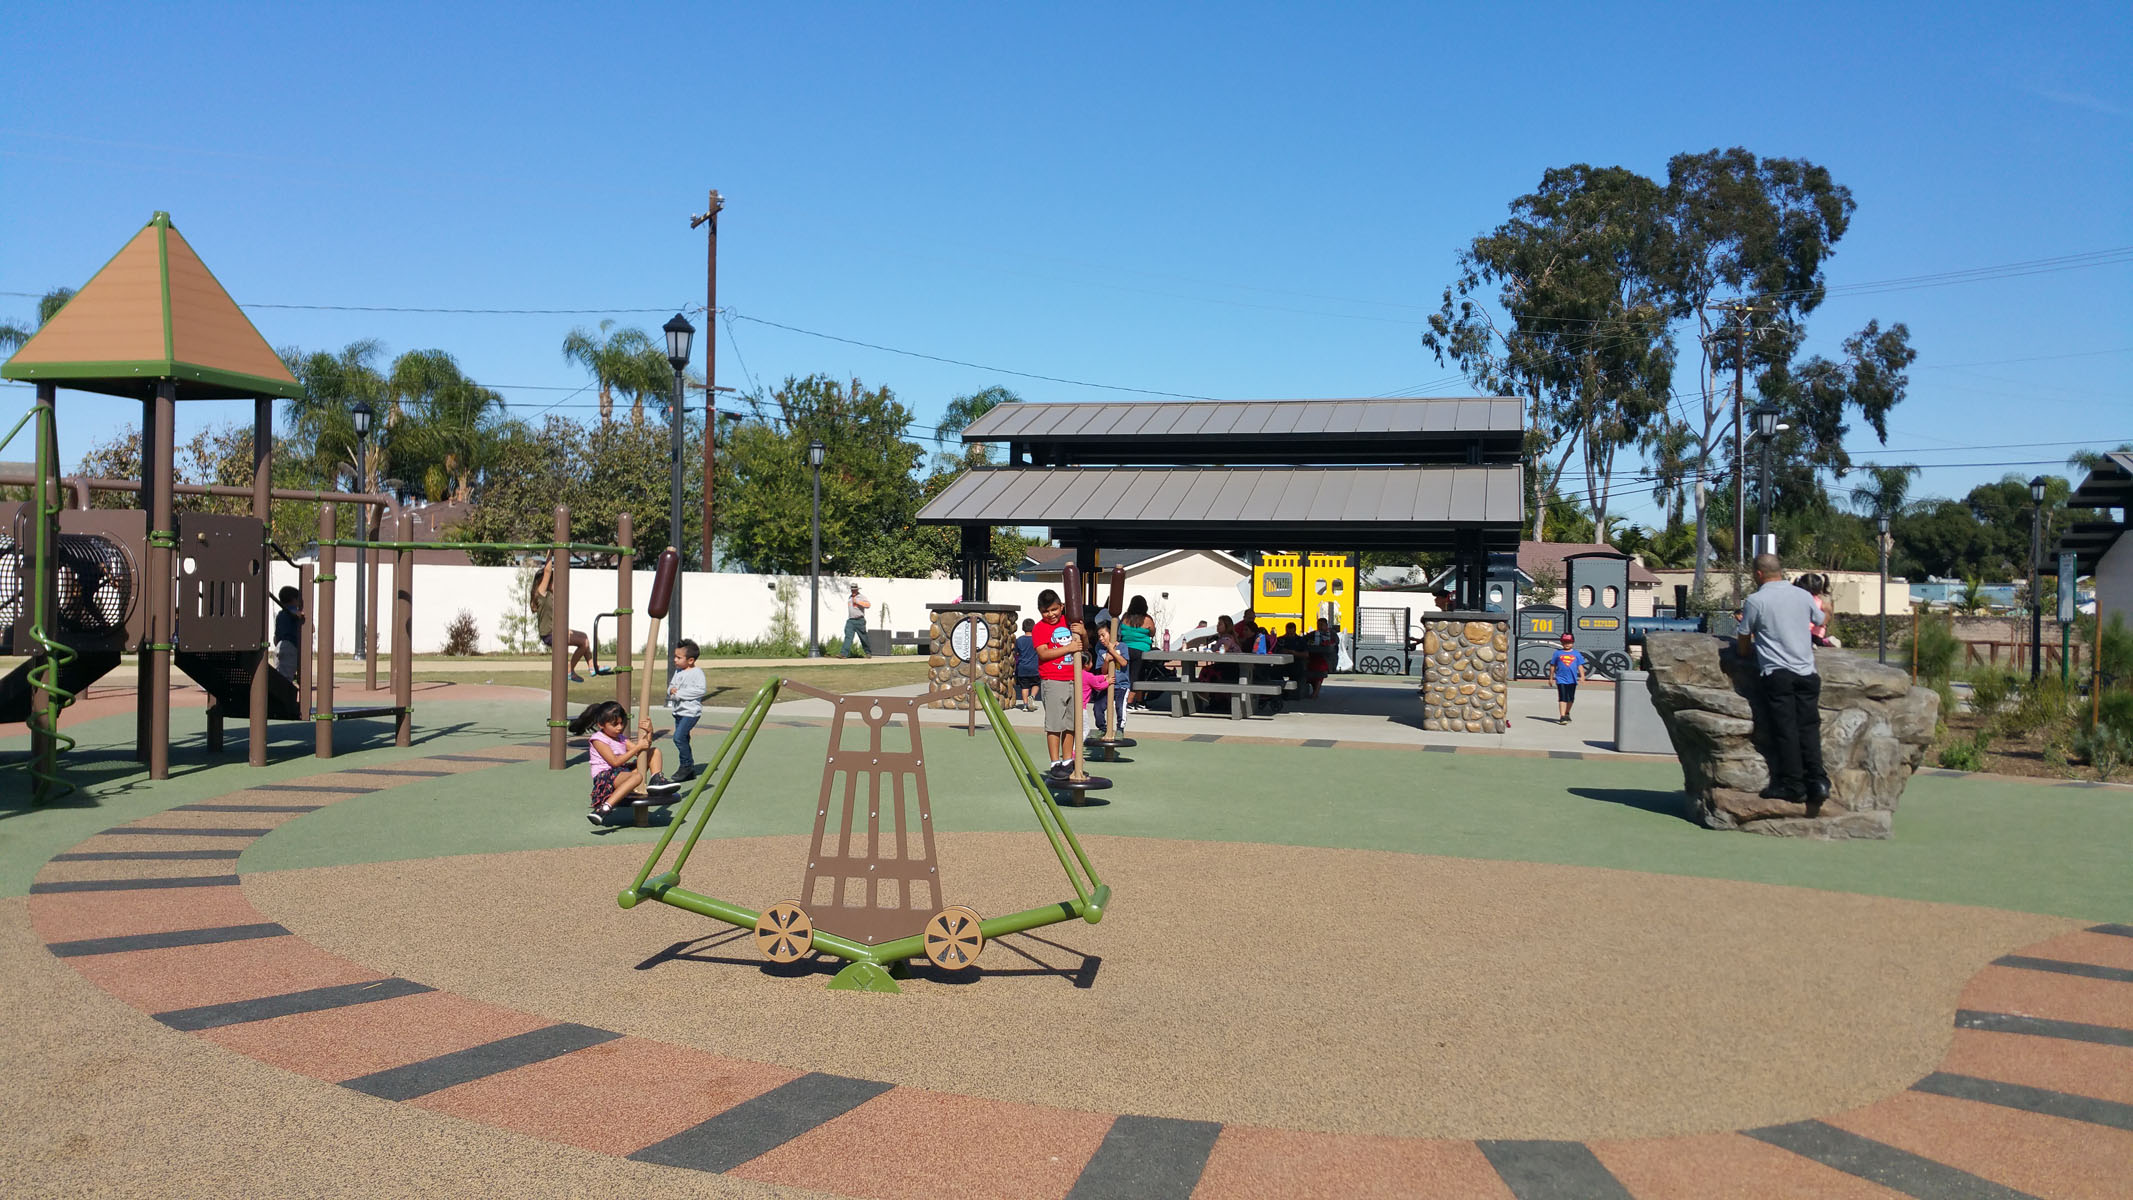 Outdoor exercise equipment at Garfield Exercise Park - City of Santa Ana